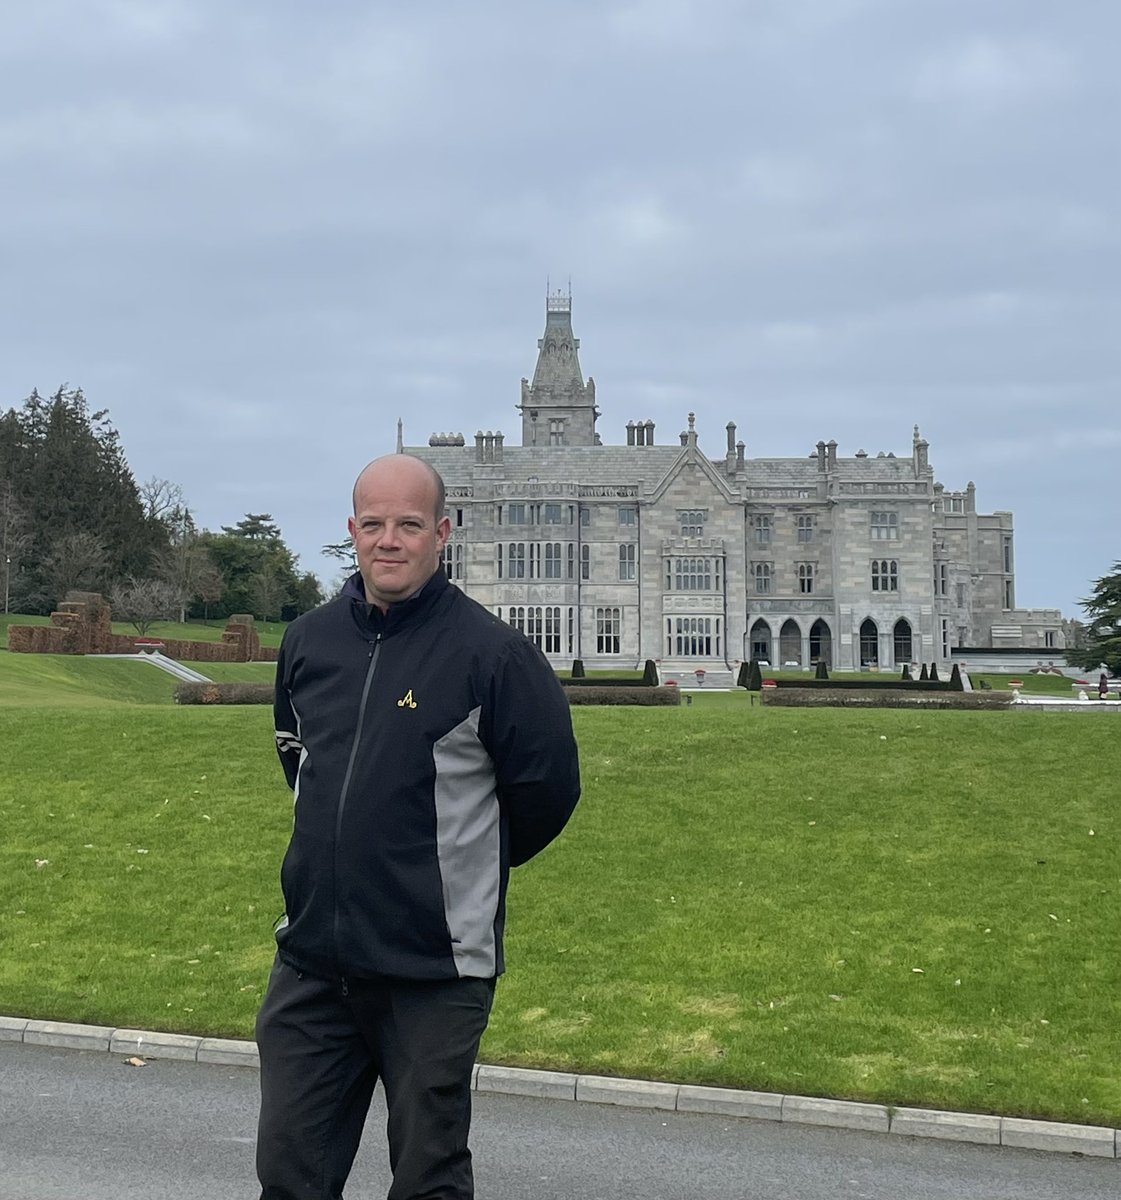 On his final tour of duty and after 21 1/2 years of loyal and dedicated service @Davebailey1980 is moving to pastures new and assuming the role of Head Greenkeeper @BallyneetyGC David thank you for such wonderful service and commitment. Best wishes for all your future endeavours.